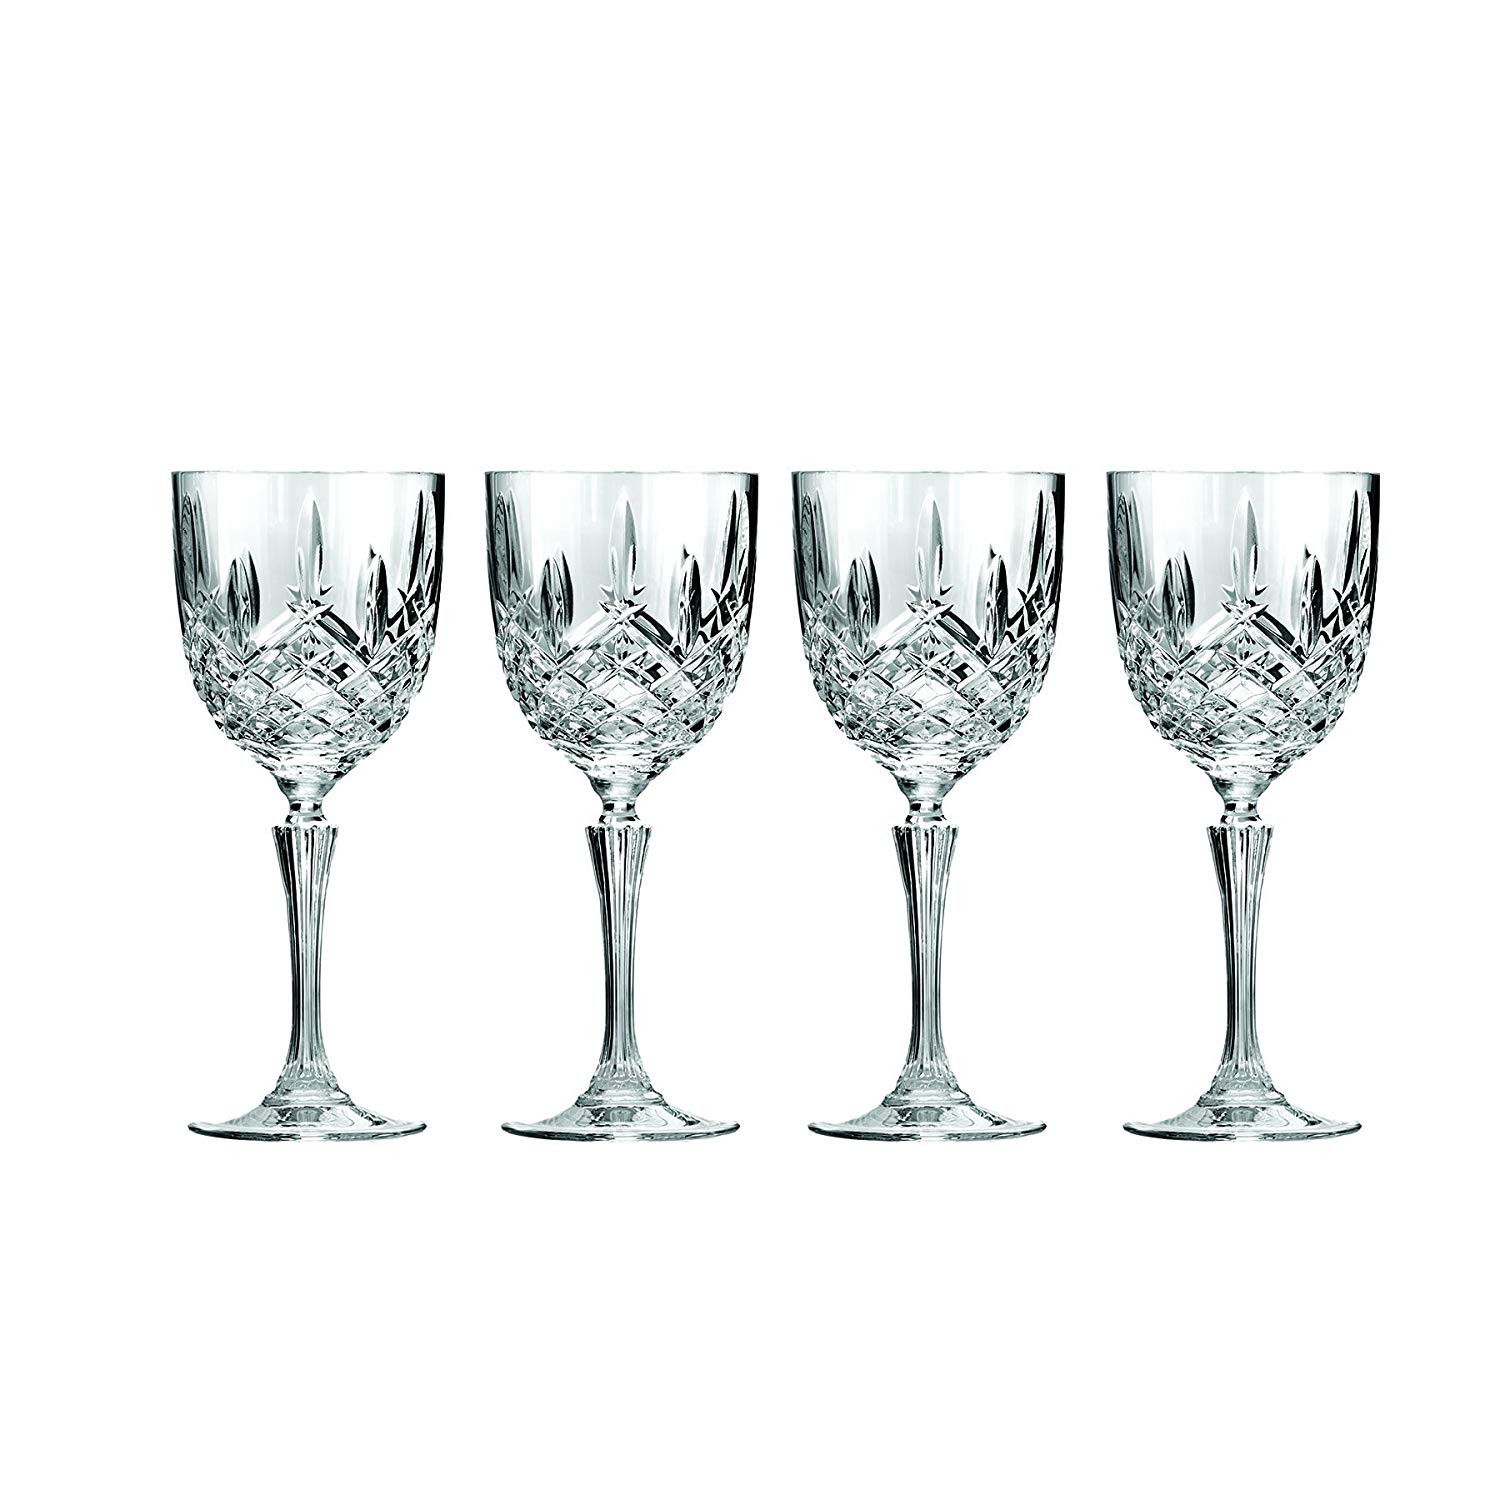 11 Nice Marquis by Waterford 9 Markham Vase 2024 free download marquis by waterford 9 markham vase of amazon com set of 4 marquis by waterford markham wine glasses pertaining to amazon com set of 4 marquis by waterford markham wine glasses beautifully d